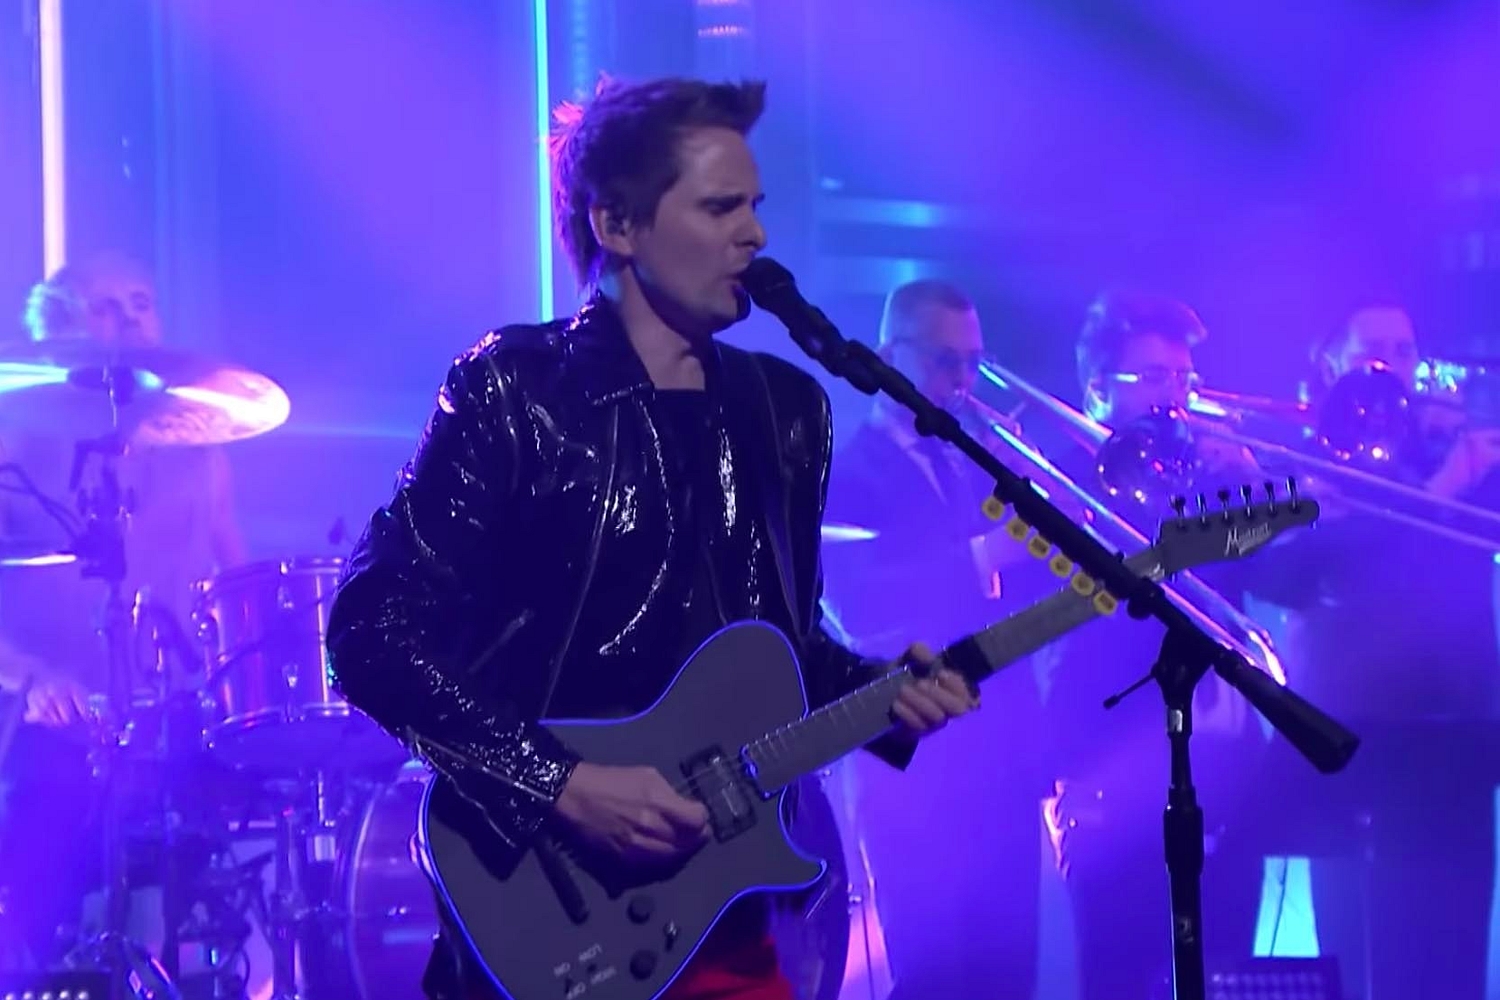 See Muse perform ‘Pressure’ on US telly